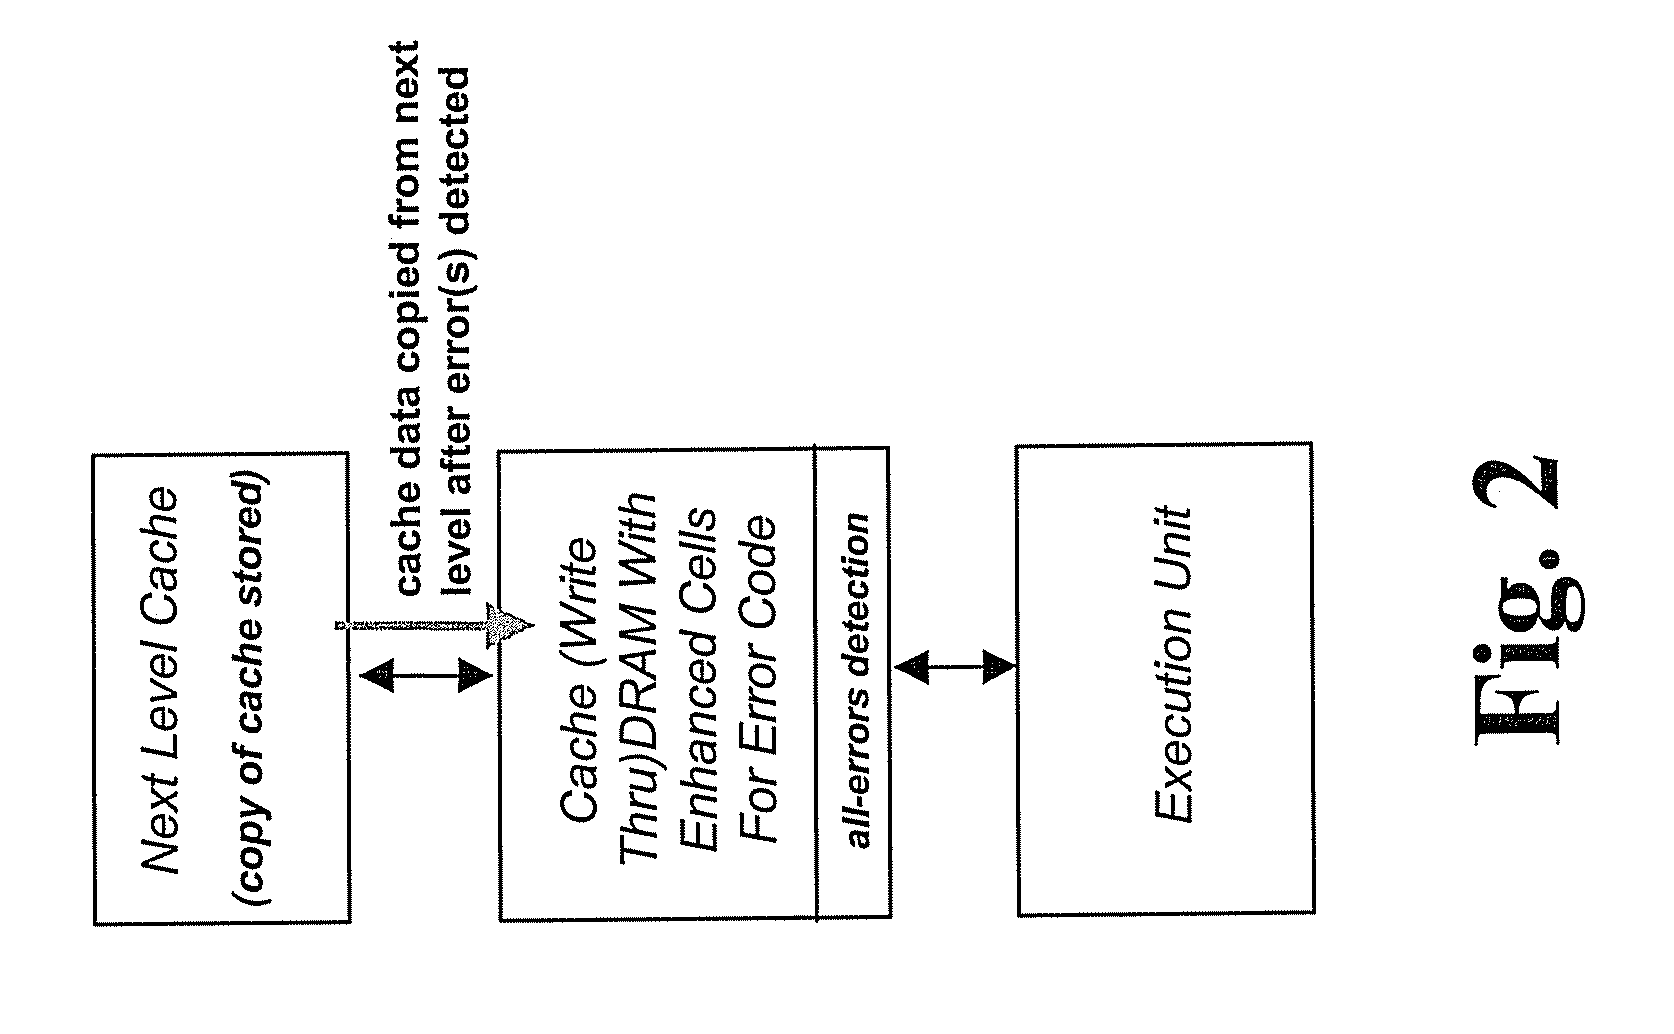 DRAM Cache with on-demand reload